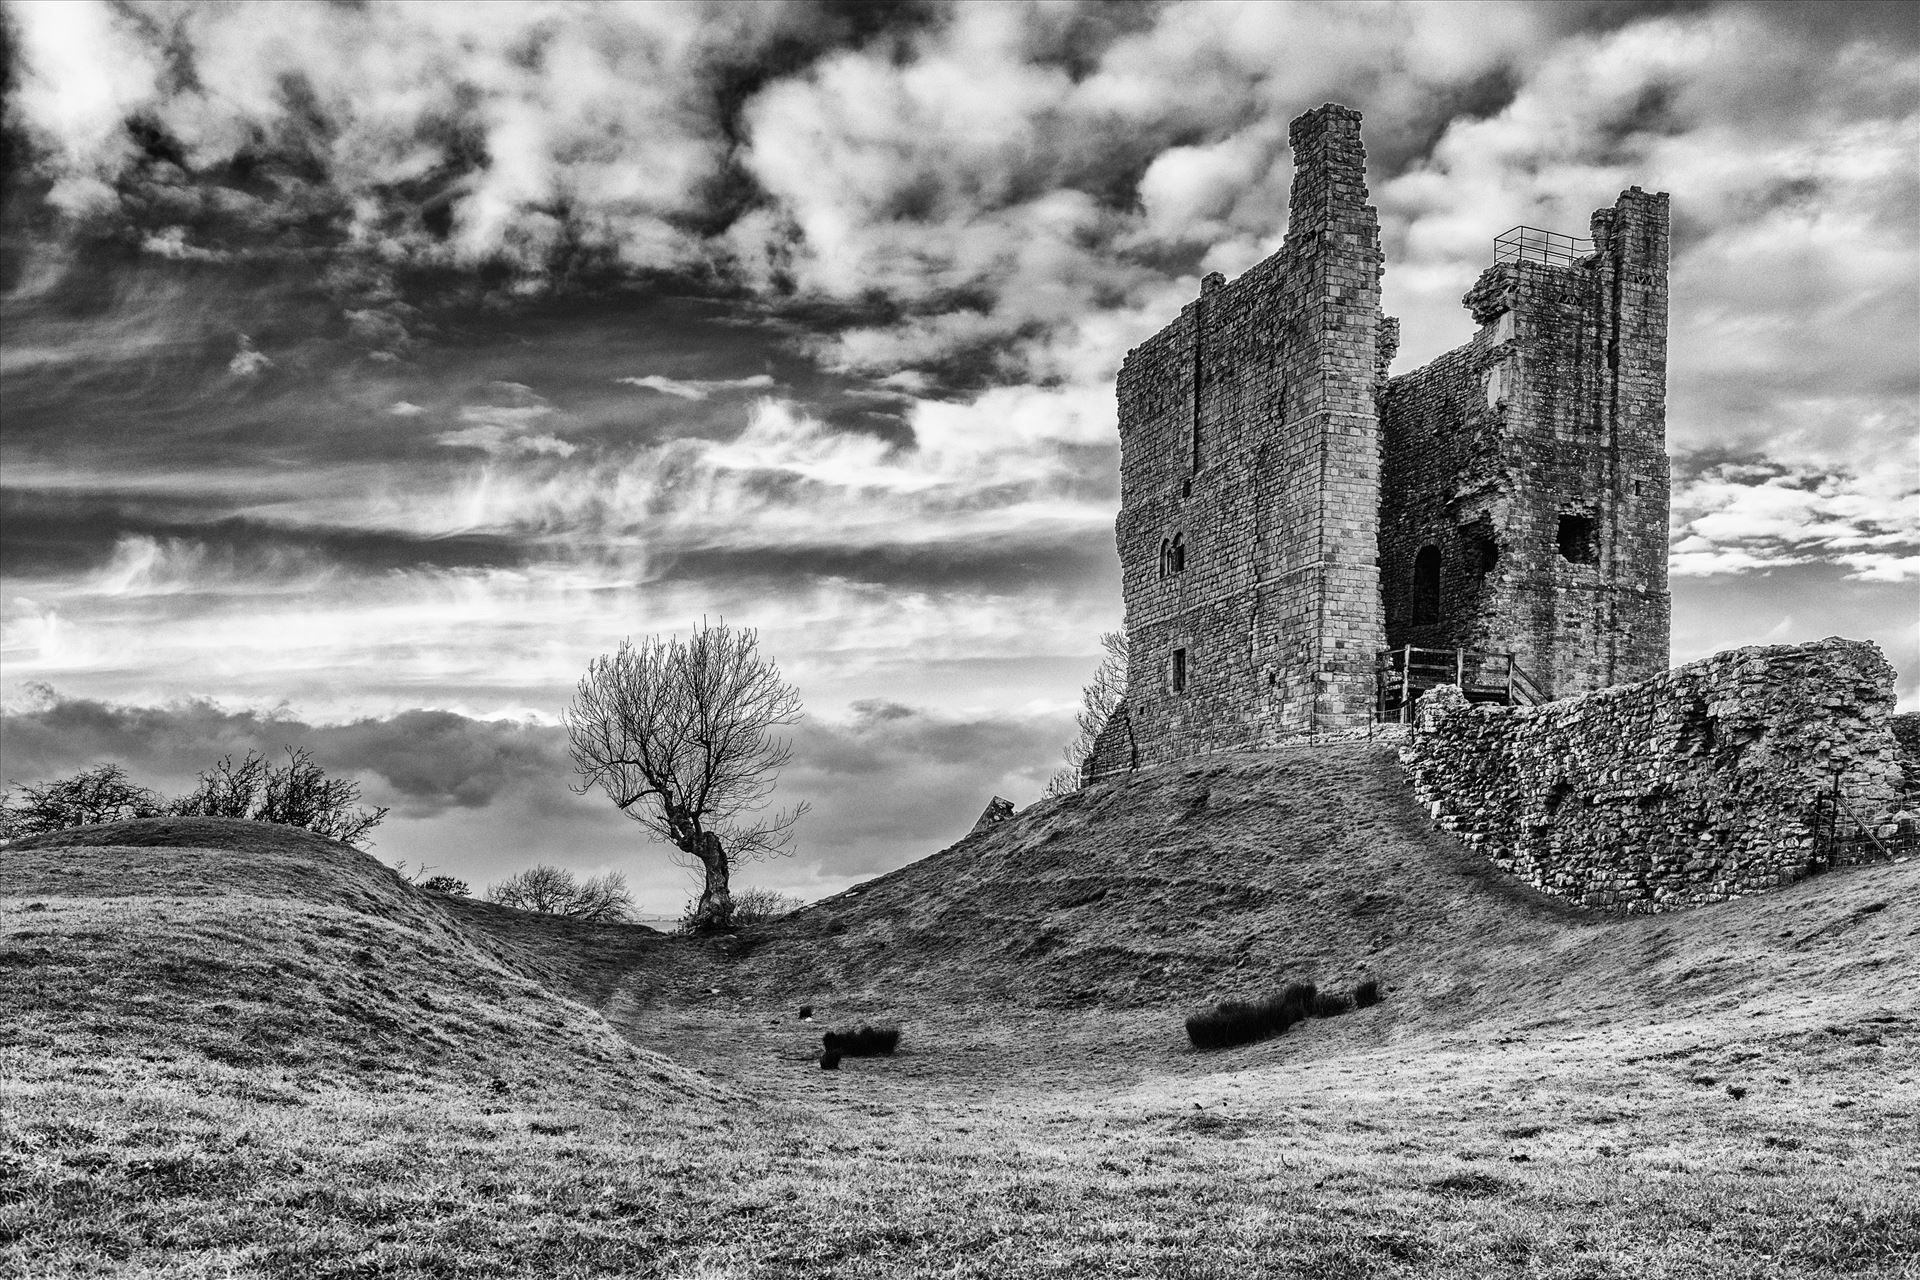 Brough Castle - Brough Castle is a ruined castle in the village of Brough, Cumbria, England. The castle was built by William Rufus around 1092 within the old Roman fort of Verterae to protect a key route through the Pennine Mountains. by philreay